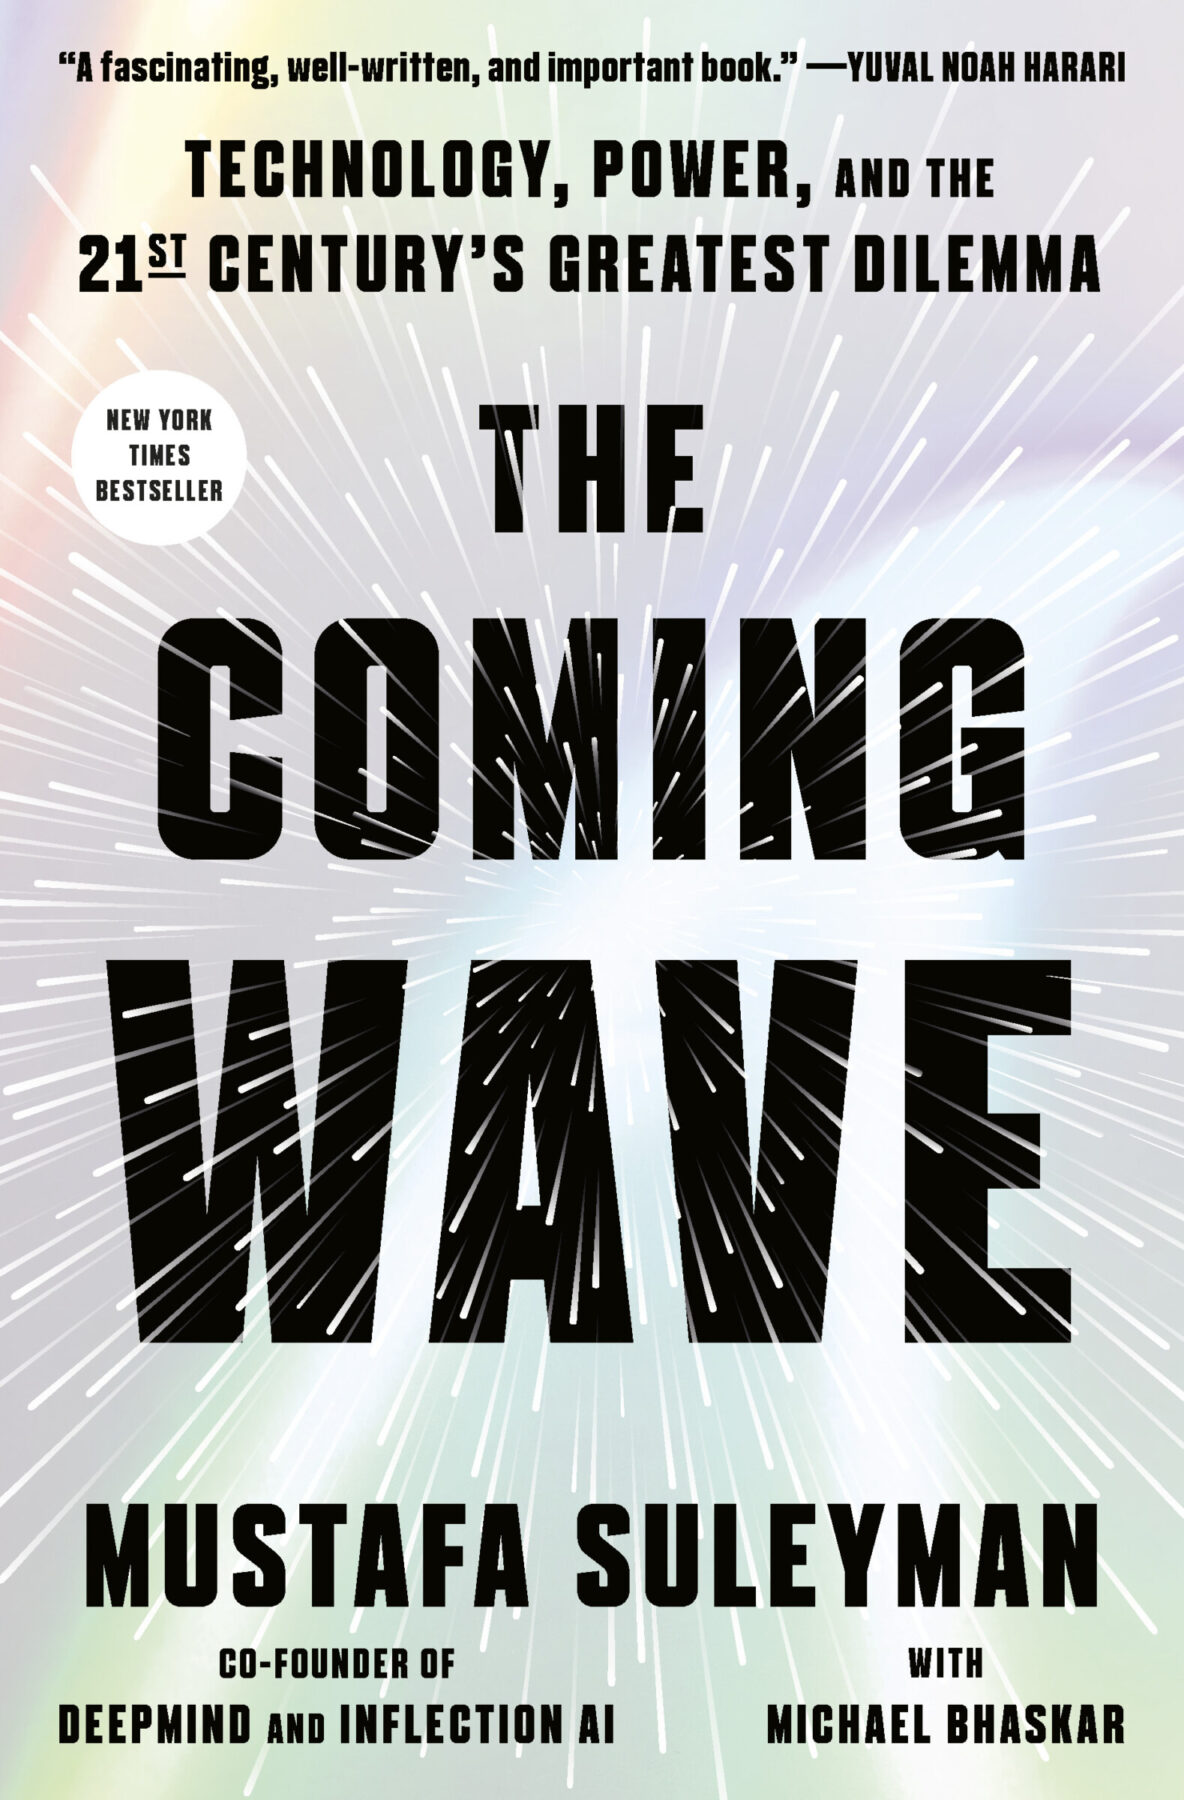 "The Coming Wave: Technology, Power, and the Twenty-First Century’s Greatest Dilemma" by Mustafa Suleyman, with Michael Bhaskar.